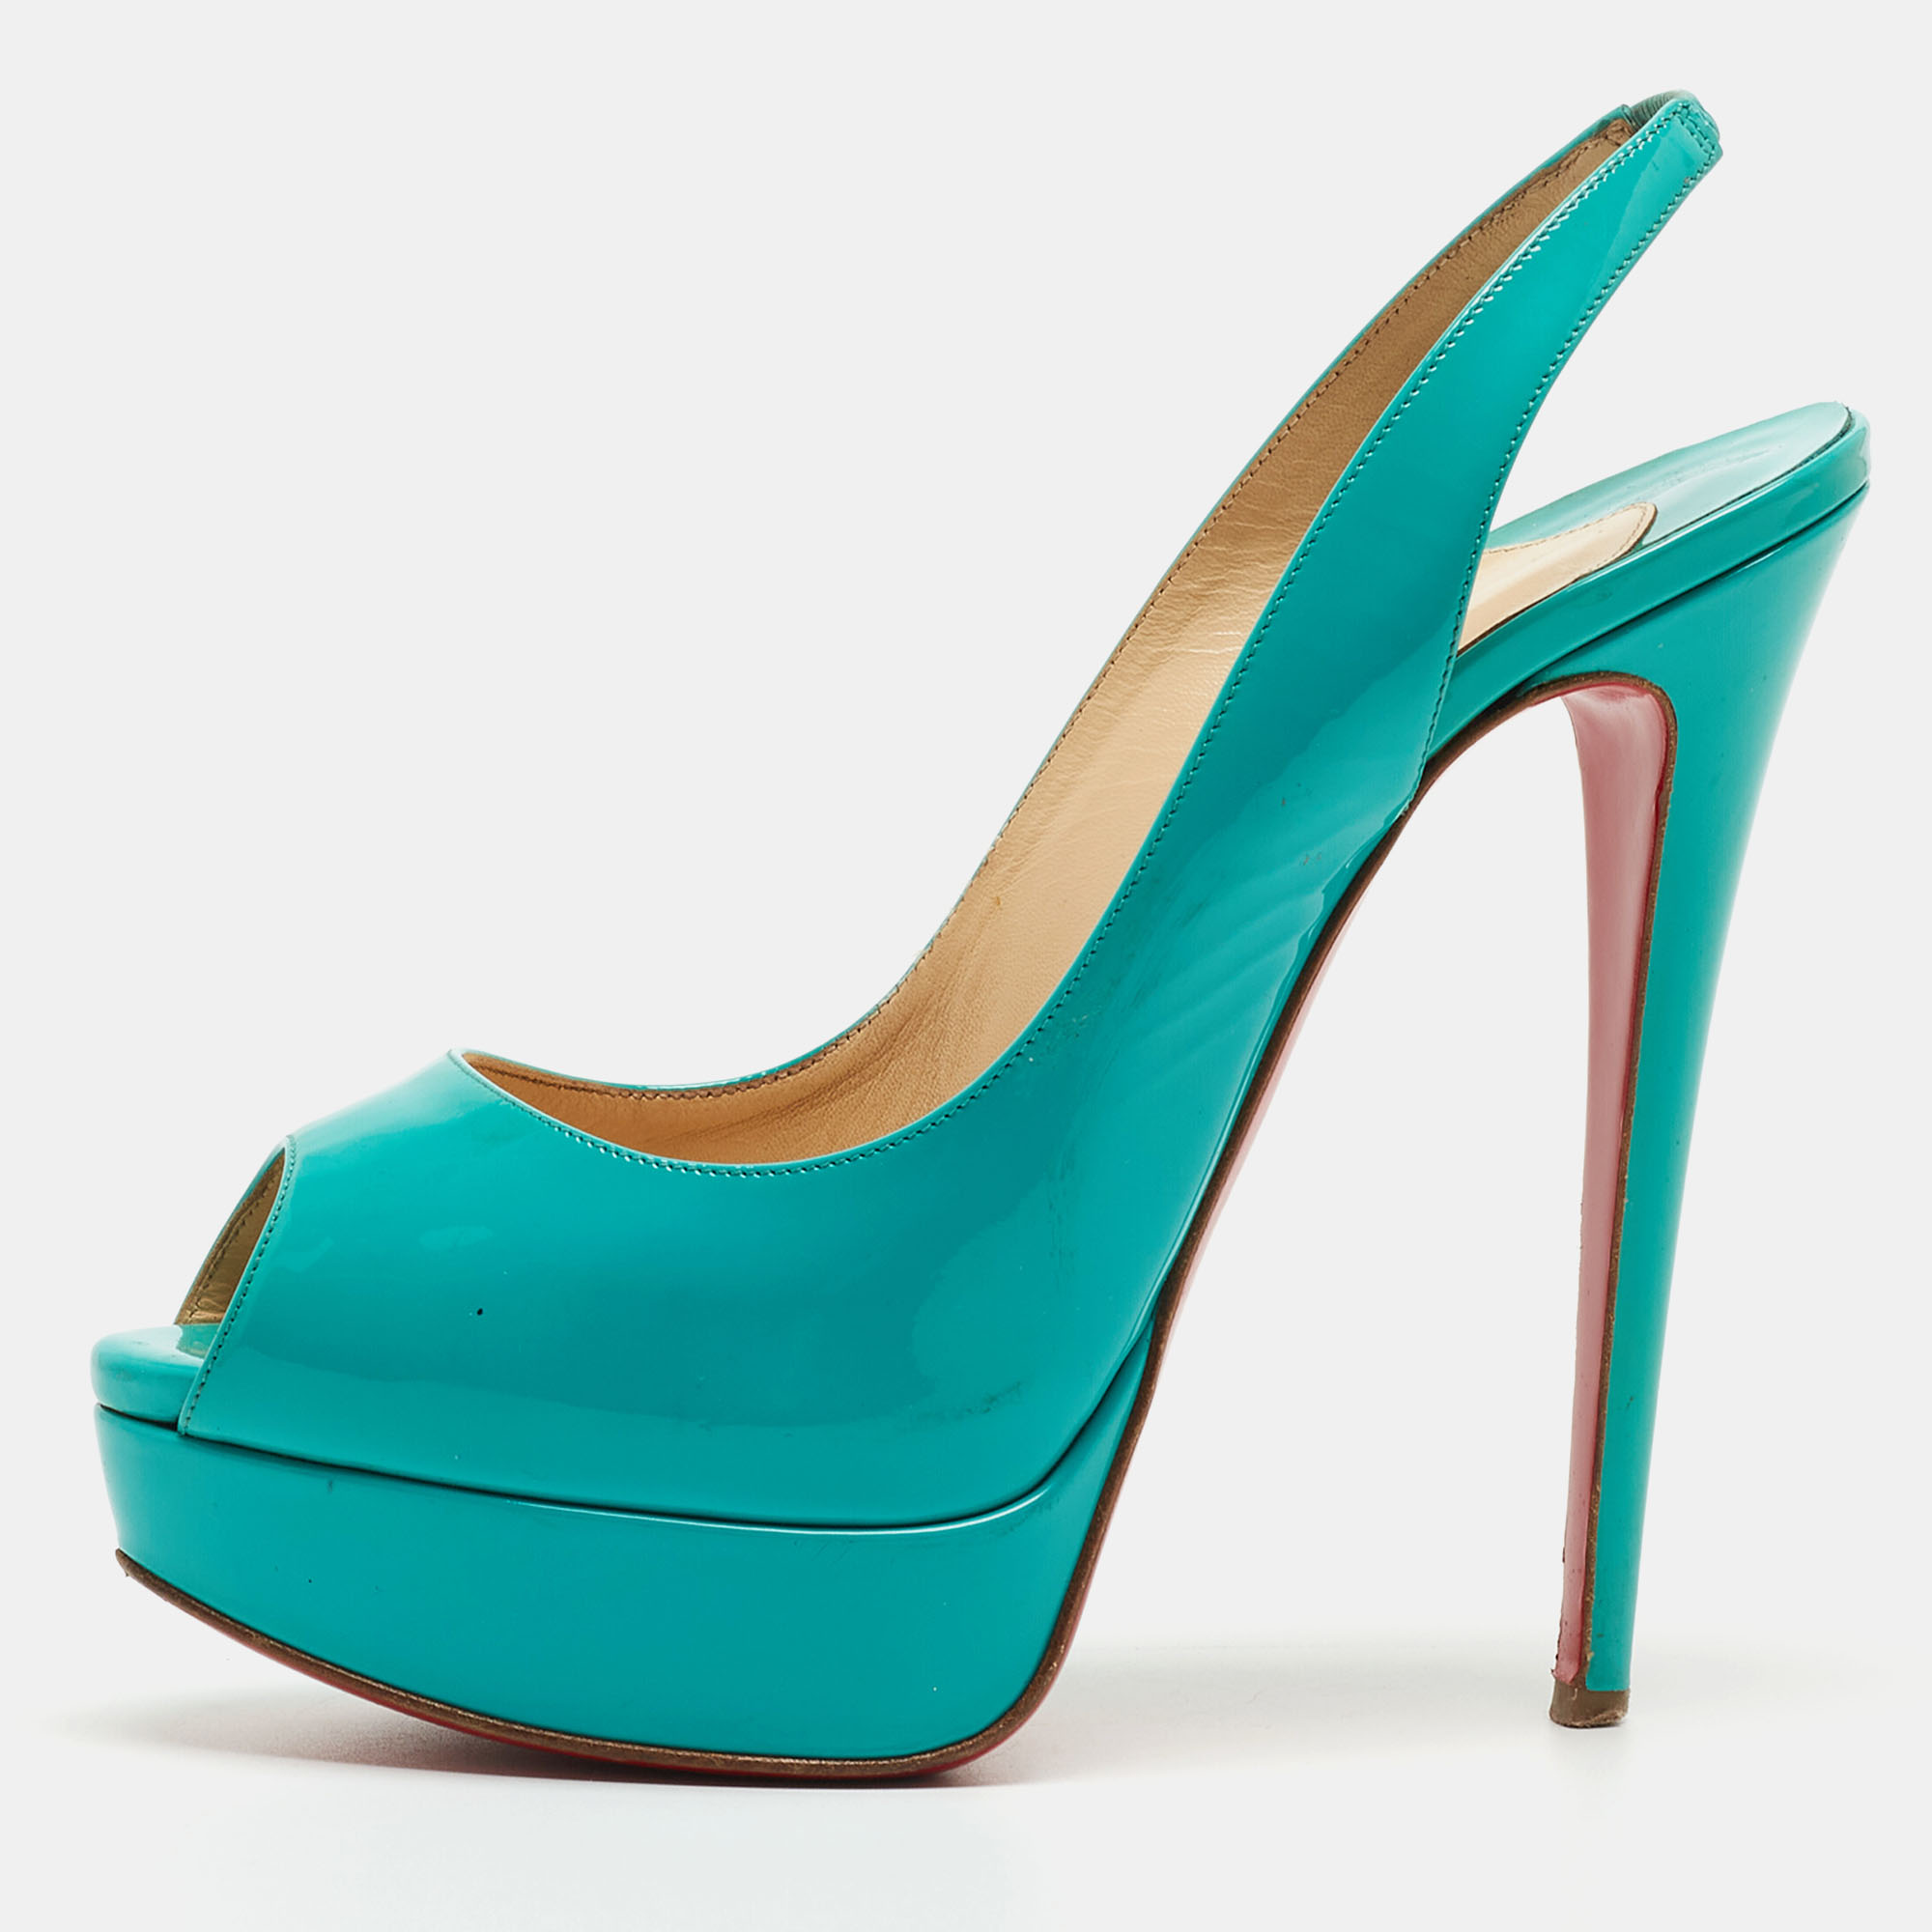 Christian louboutin turquoise patent leather lady peep sling pumps size 39.5